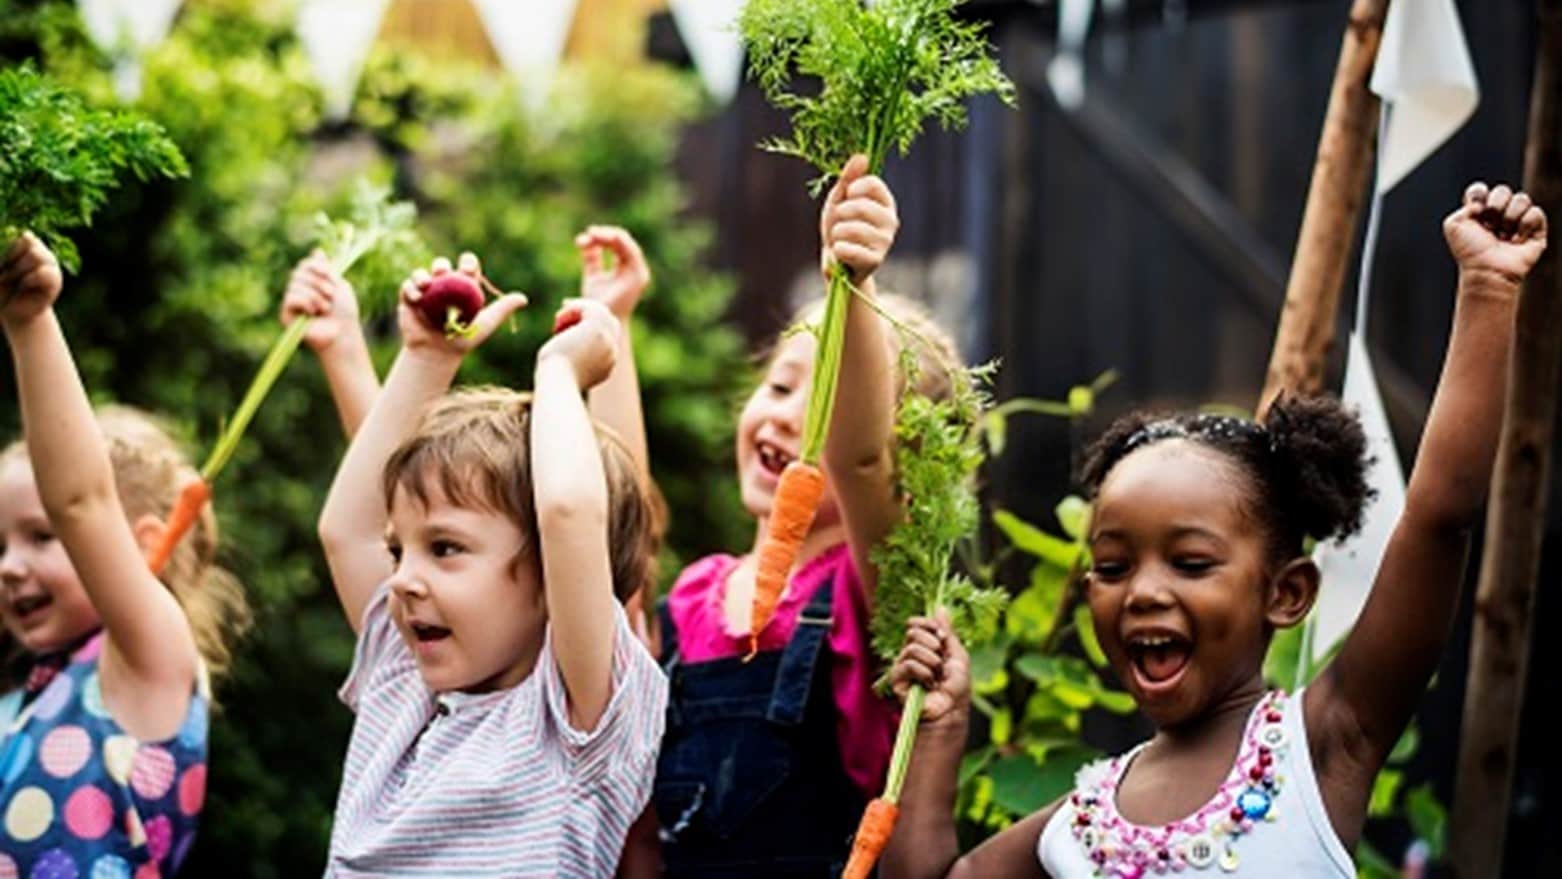 Young children in a garden and holding carrots over their heads.